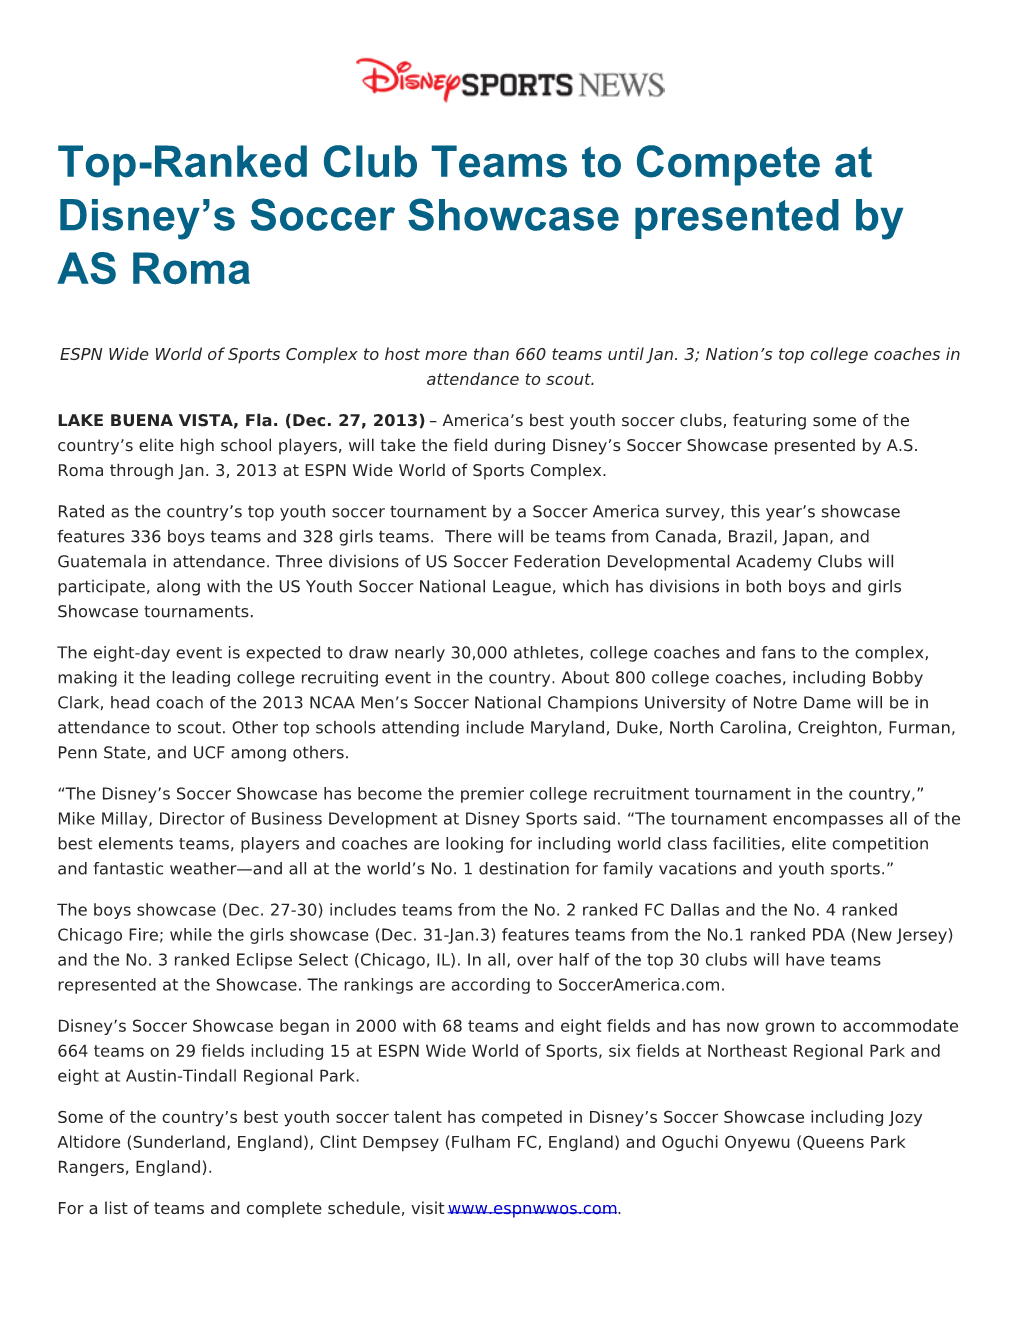 Top-Ranked Club Teams to Compete at Disney's Soccer Showcase